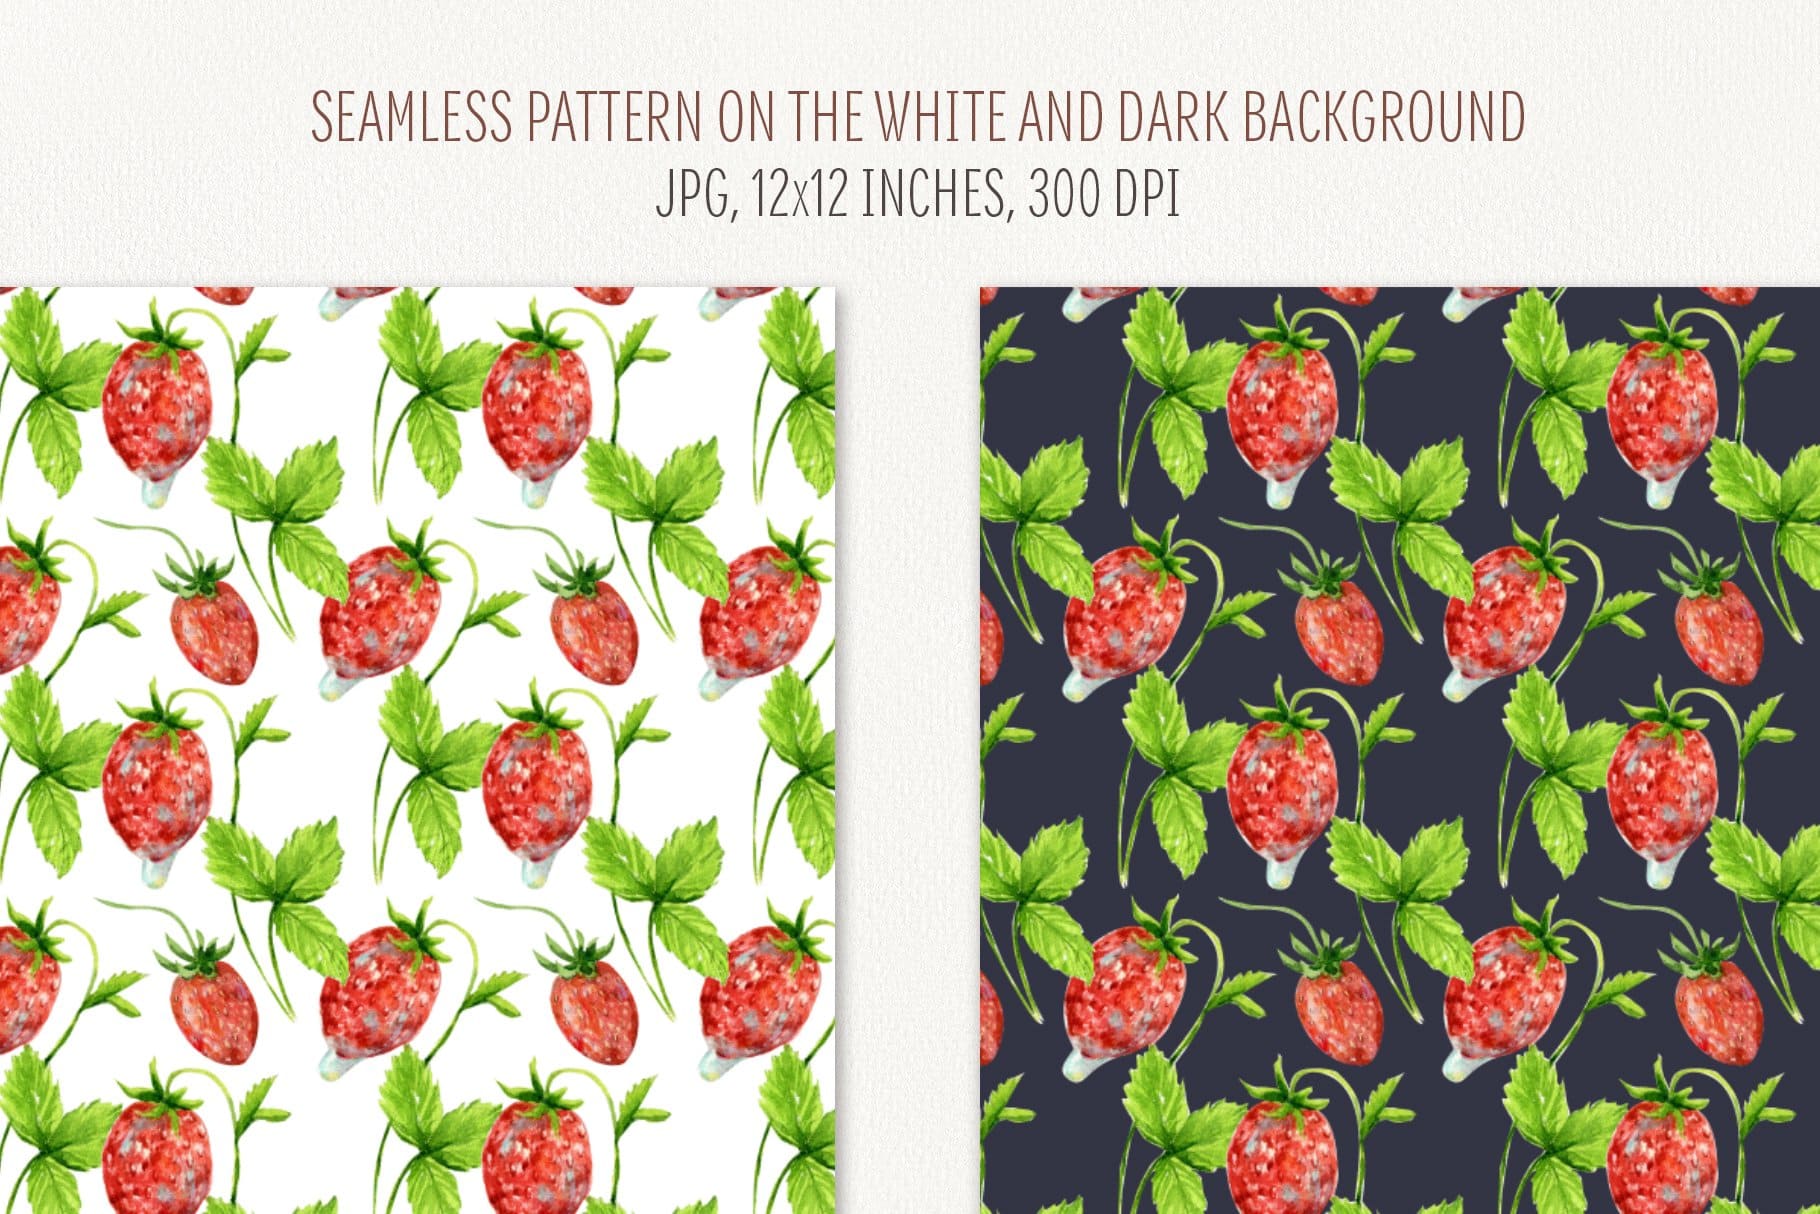 Delicious red strawberries with green leaves on white and black backgrounds.